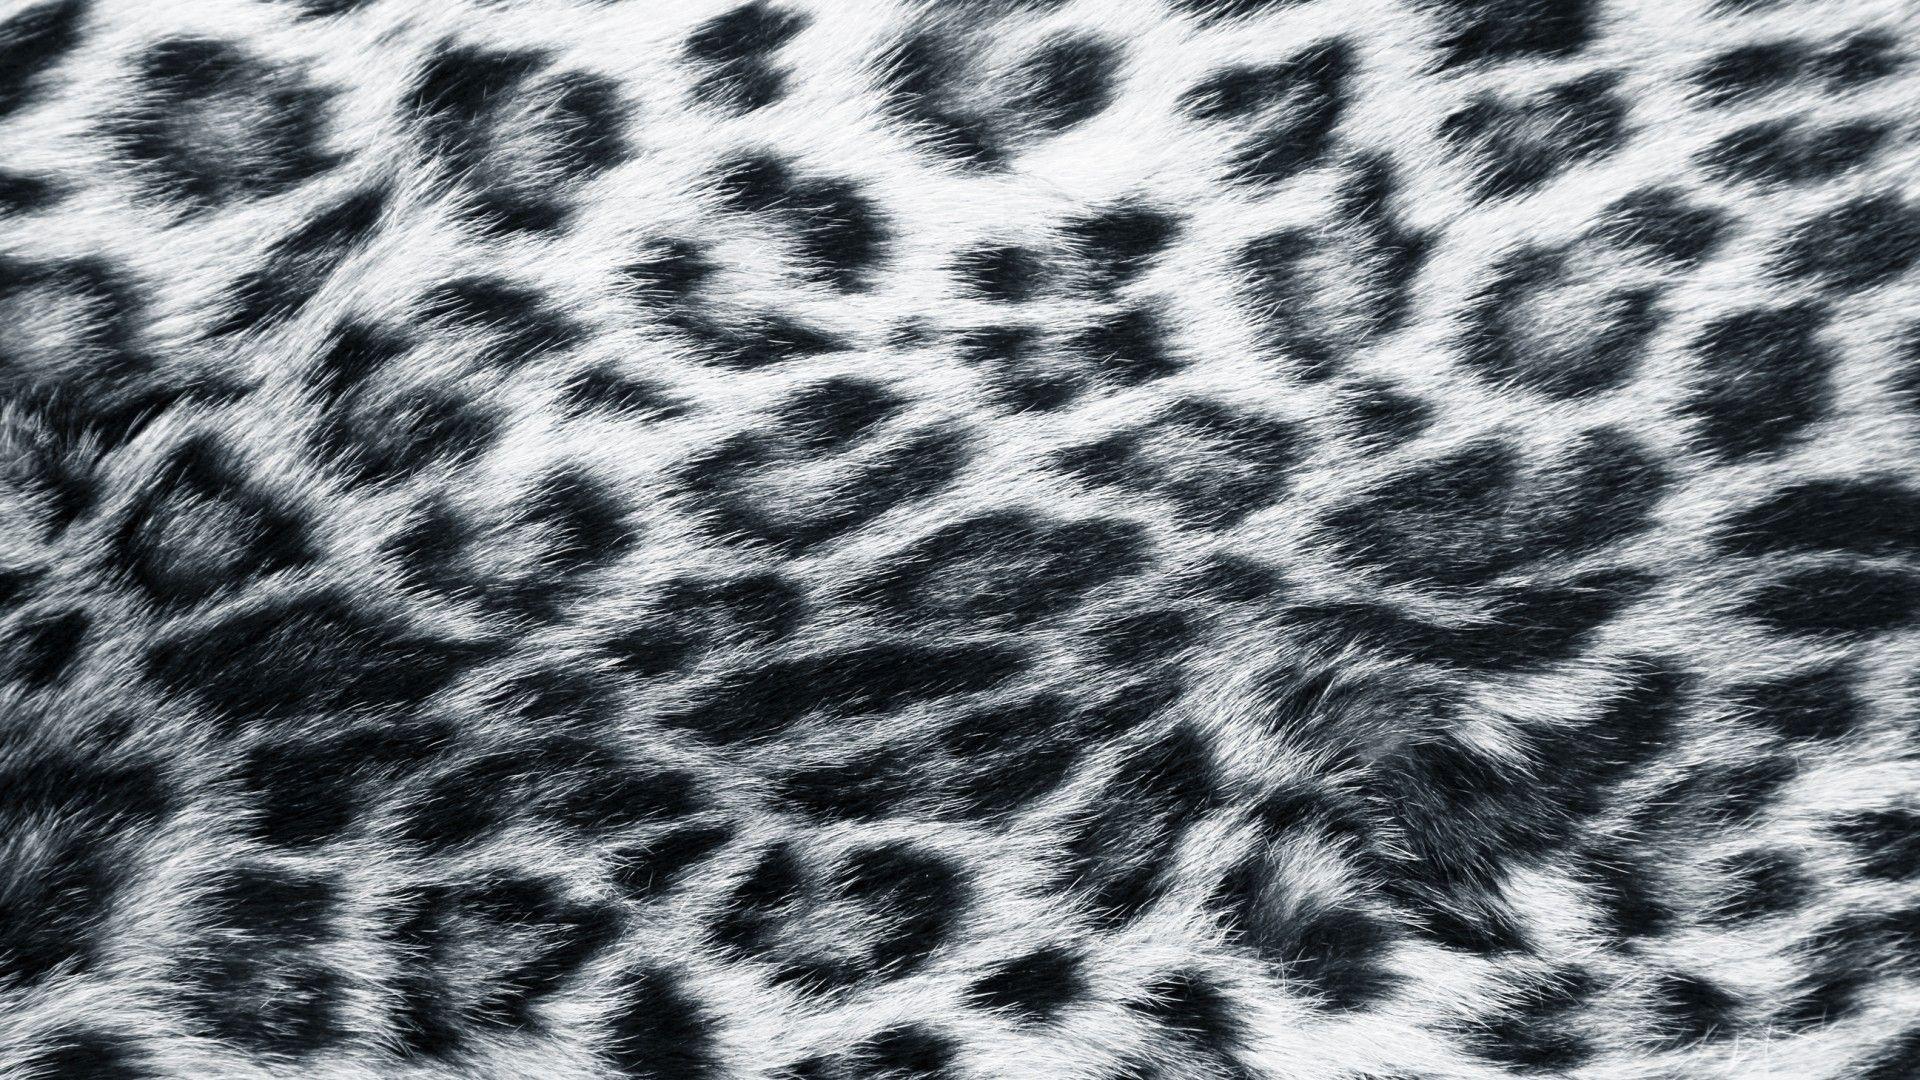 Snow Leopard Print Wallpapers Top Free Snow Leopard Print Backgrounds 